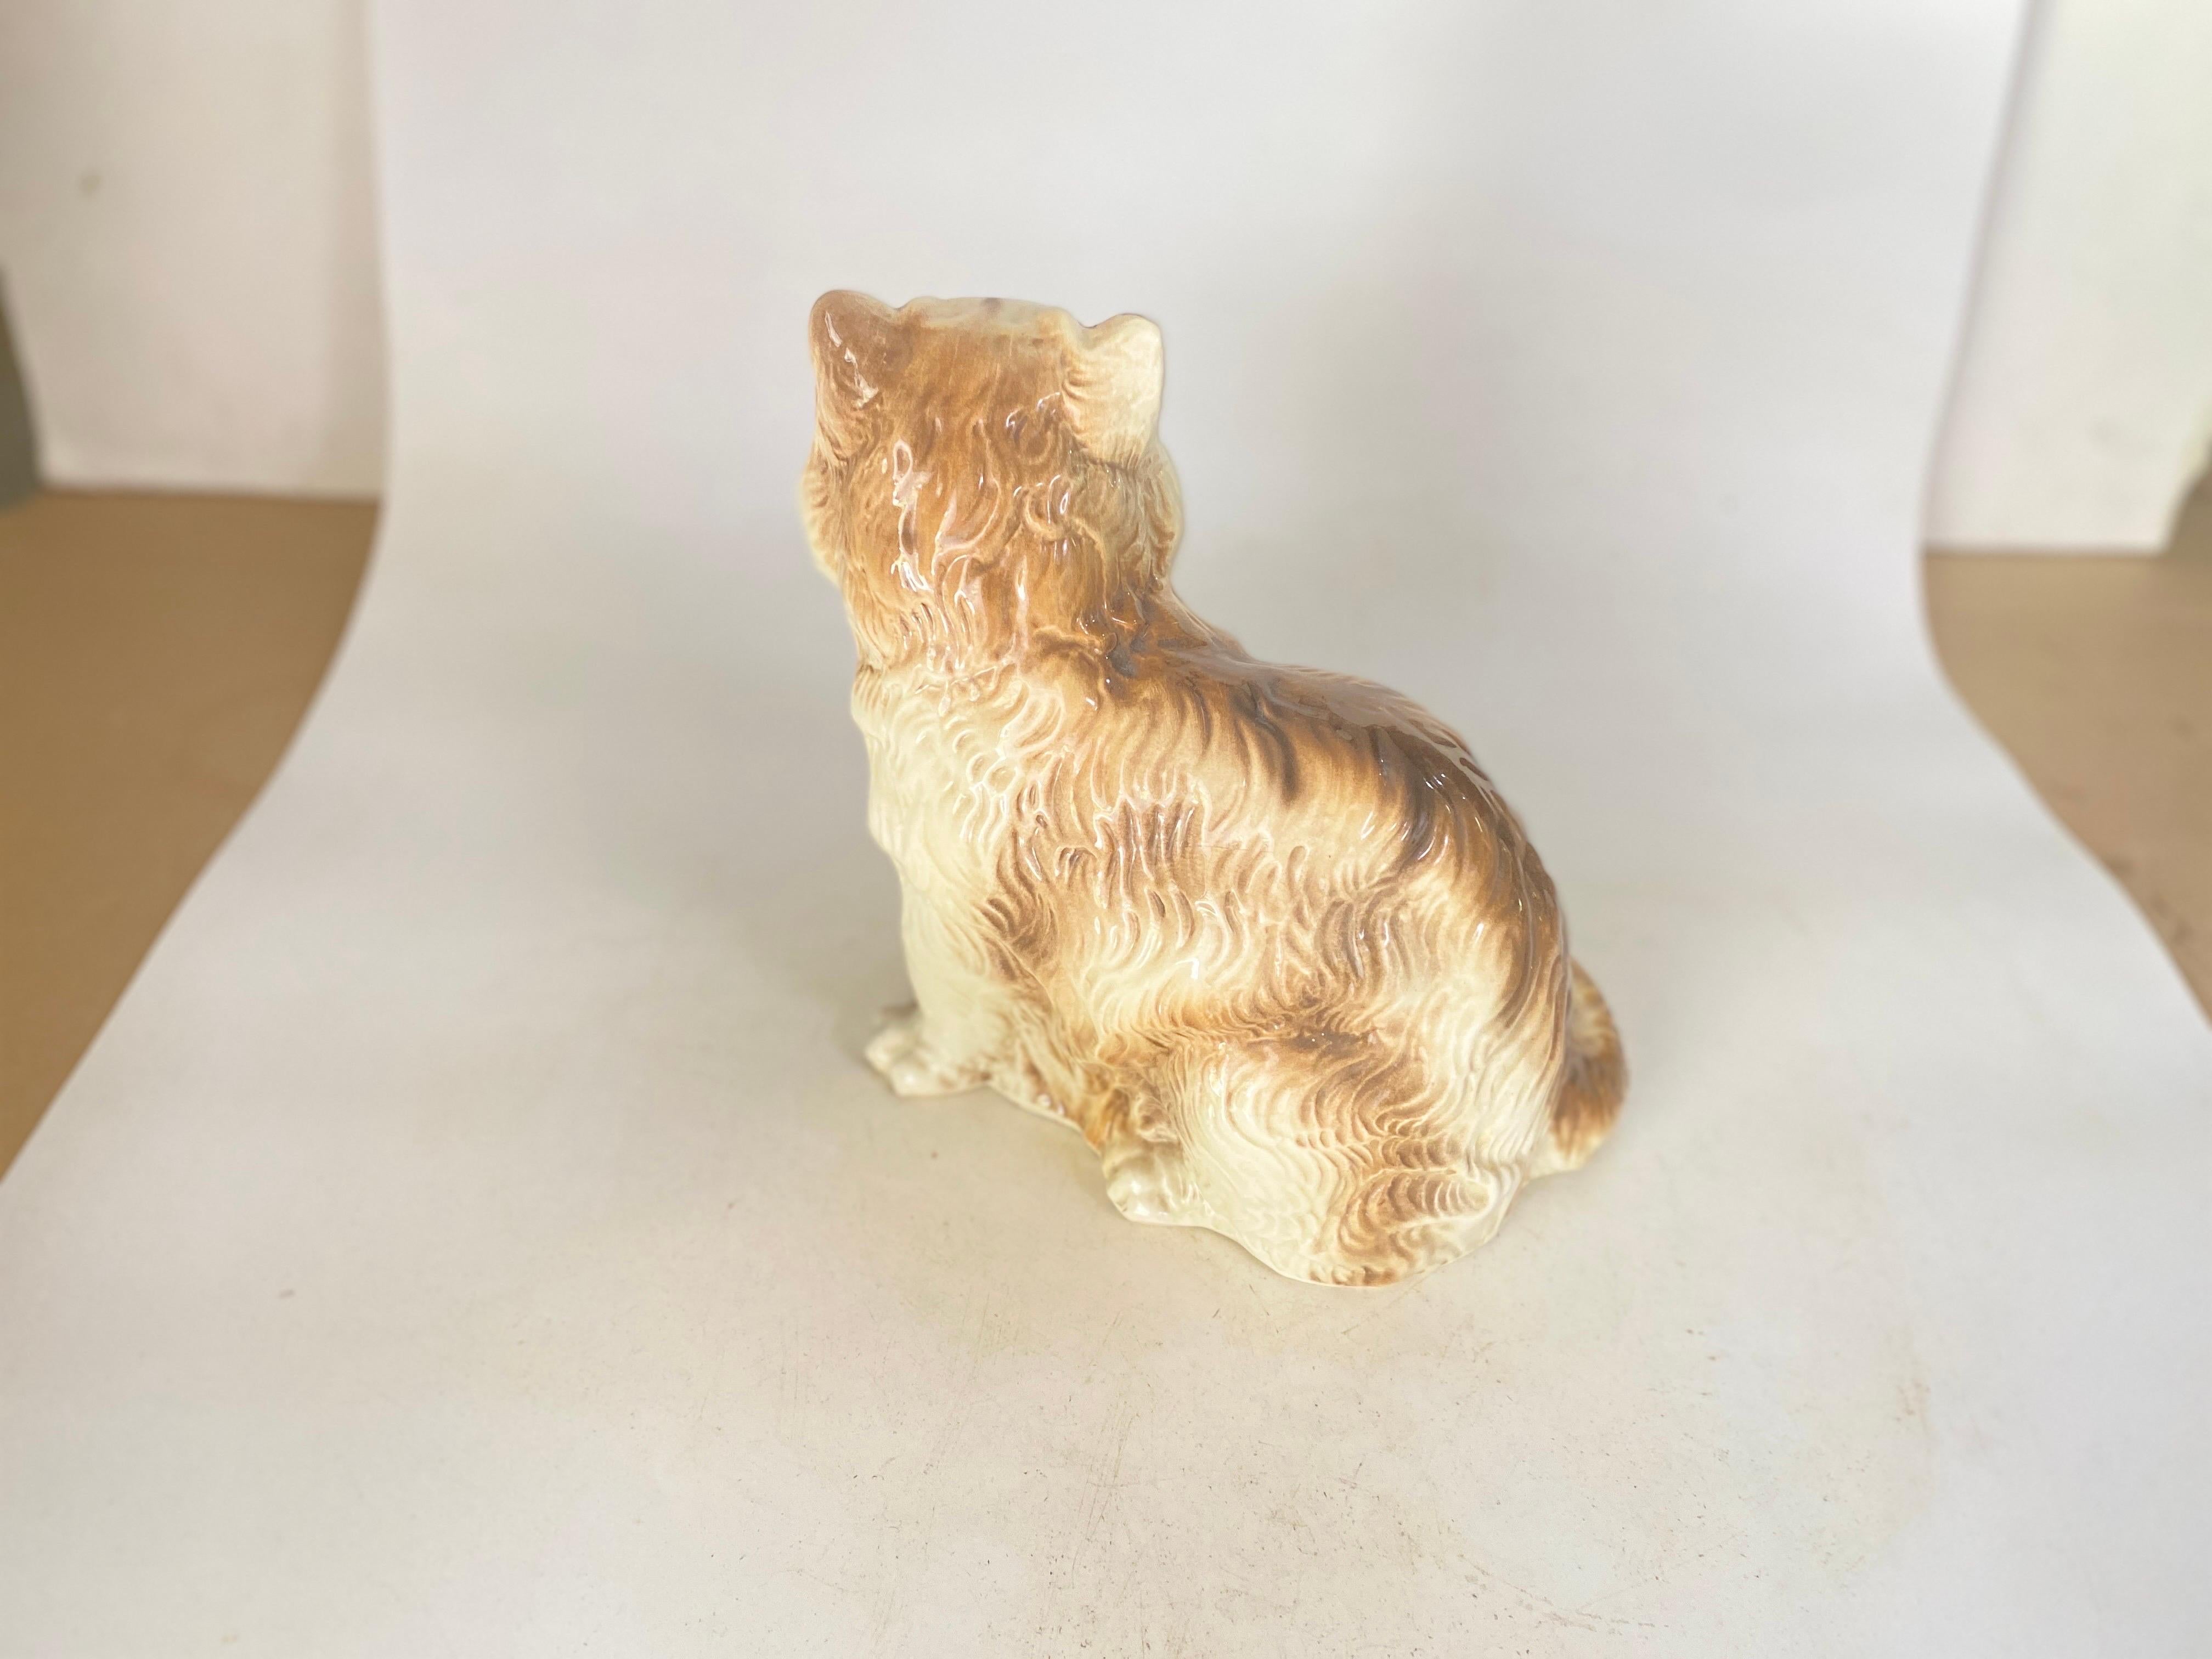 Large Cat Italian Ceramic Sculpture from the 1970s with Hand-Painted Details In Good Condition For Sale In Auribeau sur Siagne, FR